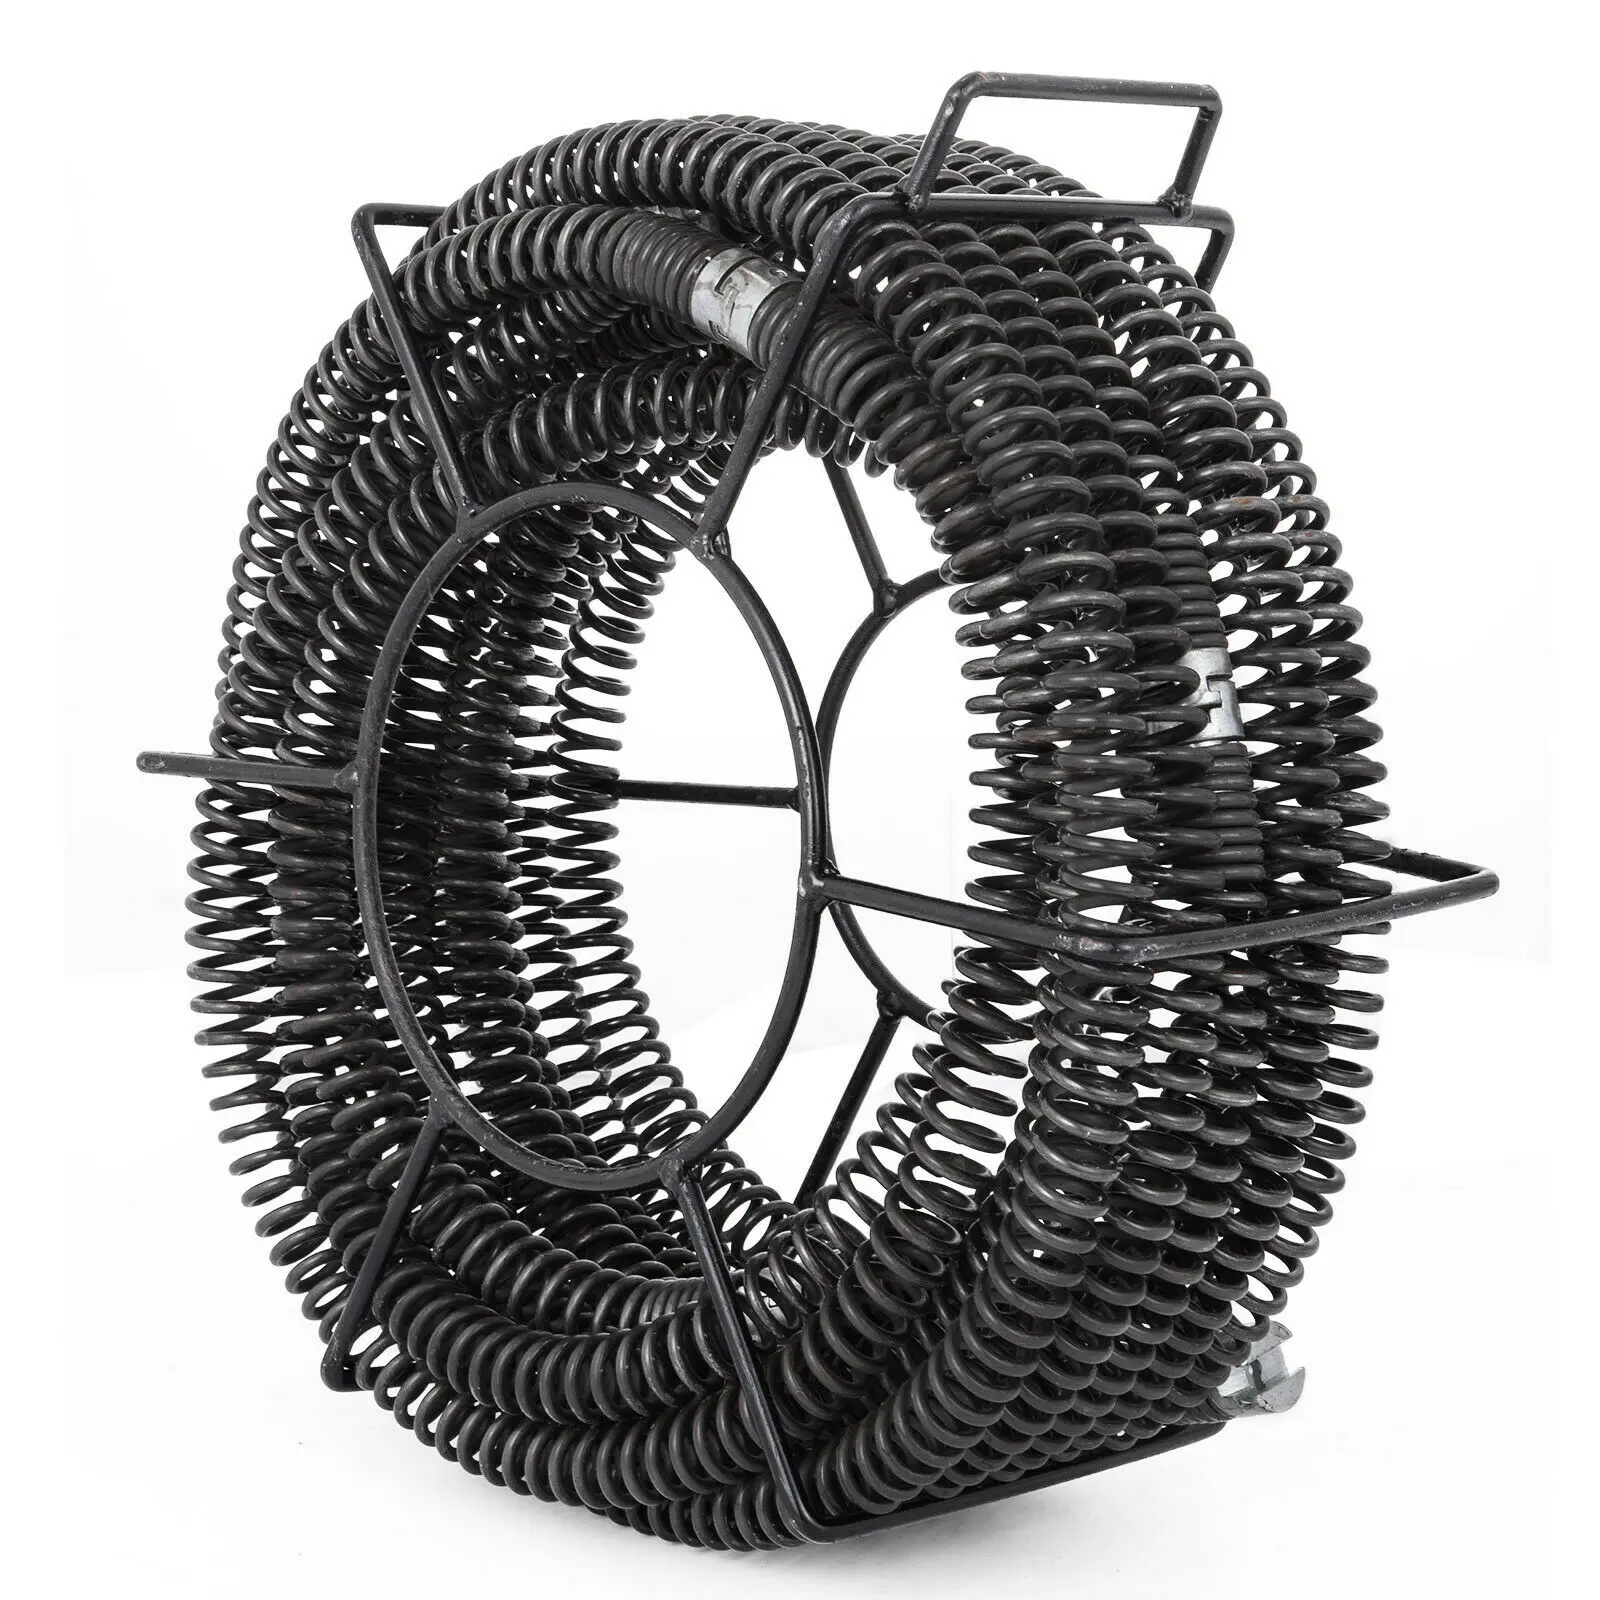 20-200mm Pipe Drain Cleaner 1100W Pipe Drain Cleaning Machine 16mx30mm Spiral Set with 6 cutters enlarge